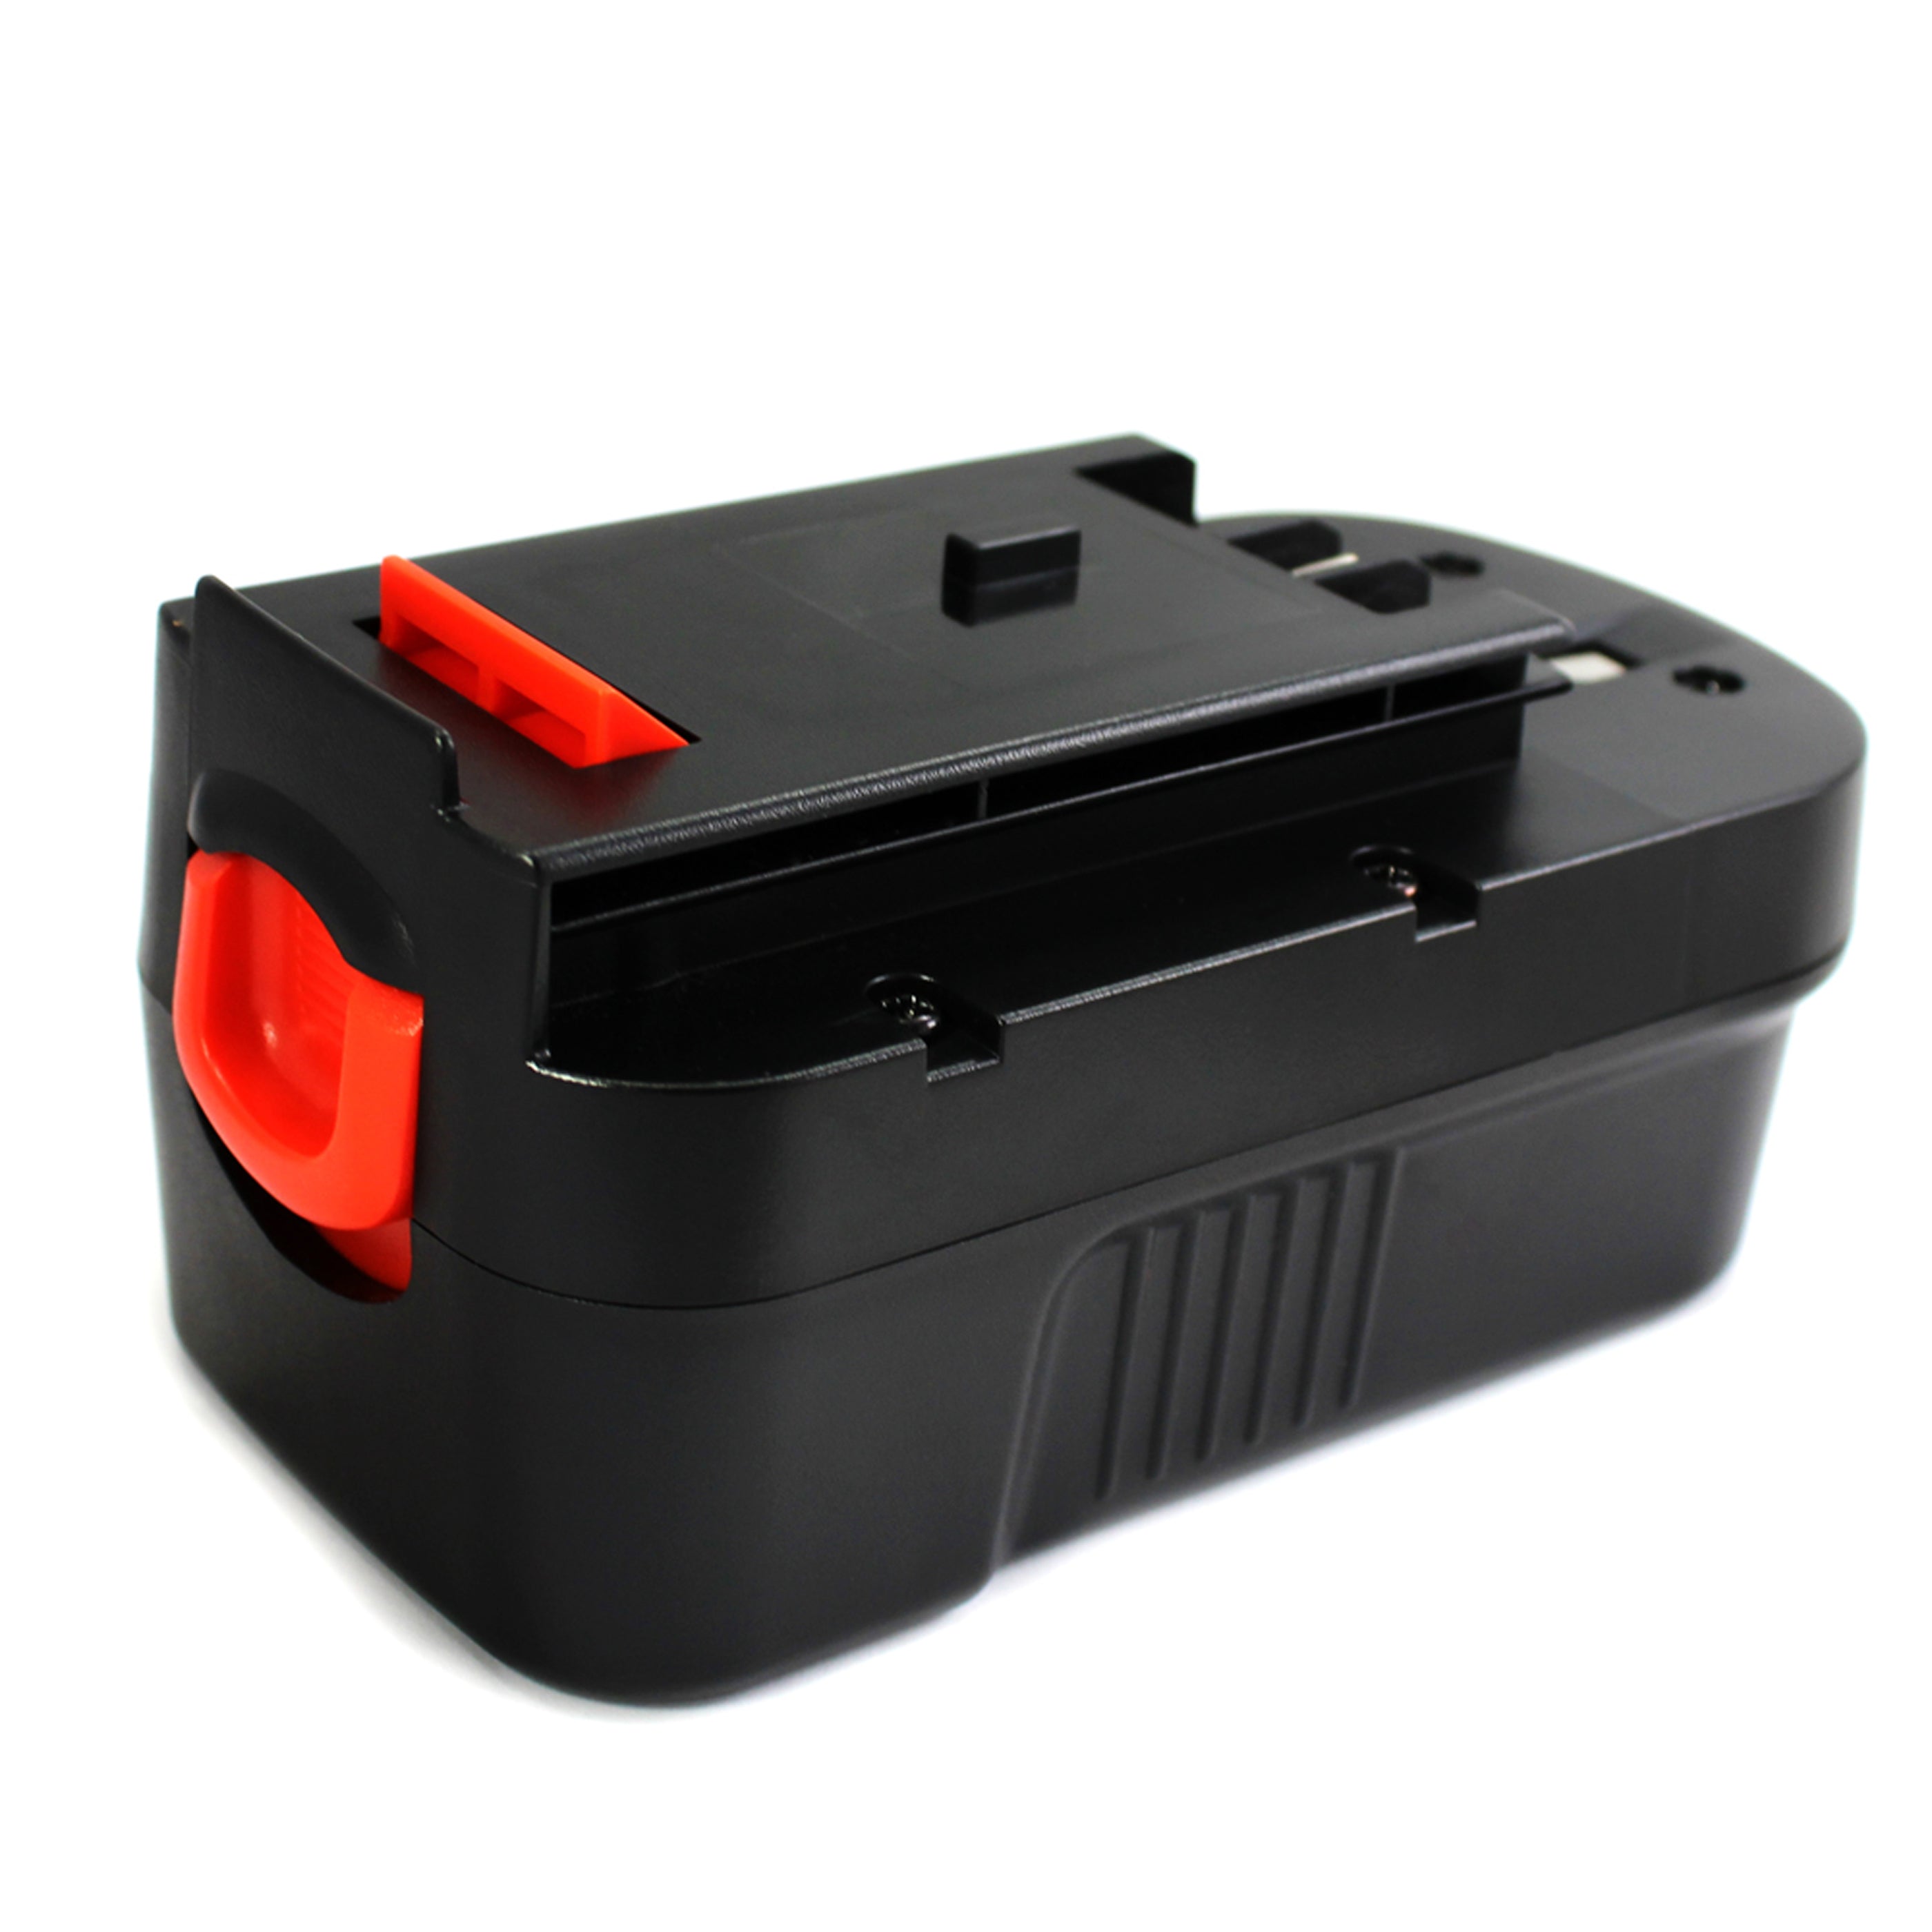 Buy 18v Black And Decker Battery Replacement online